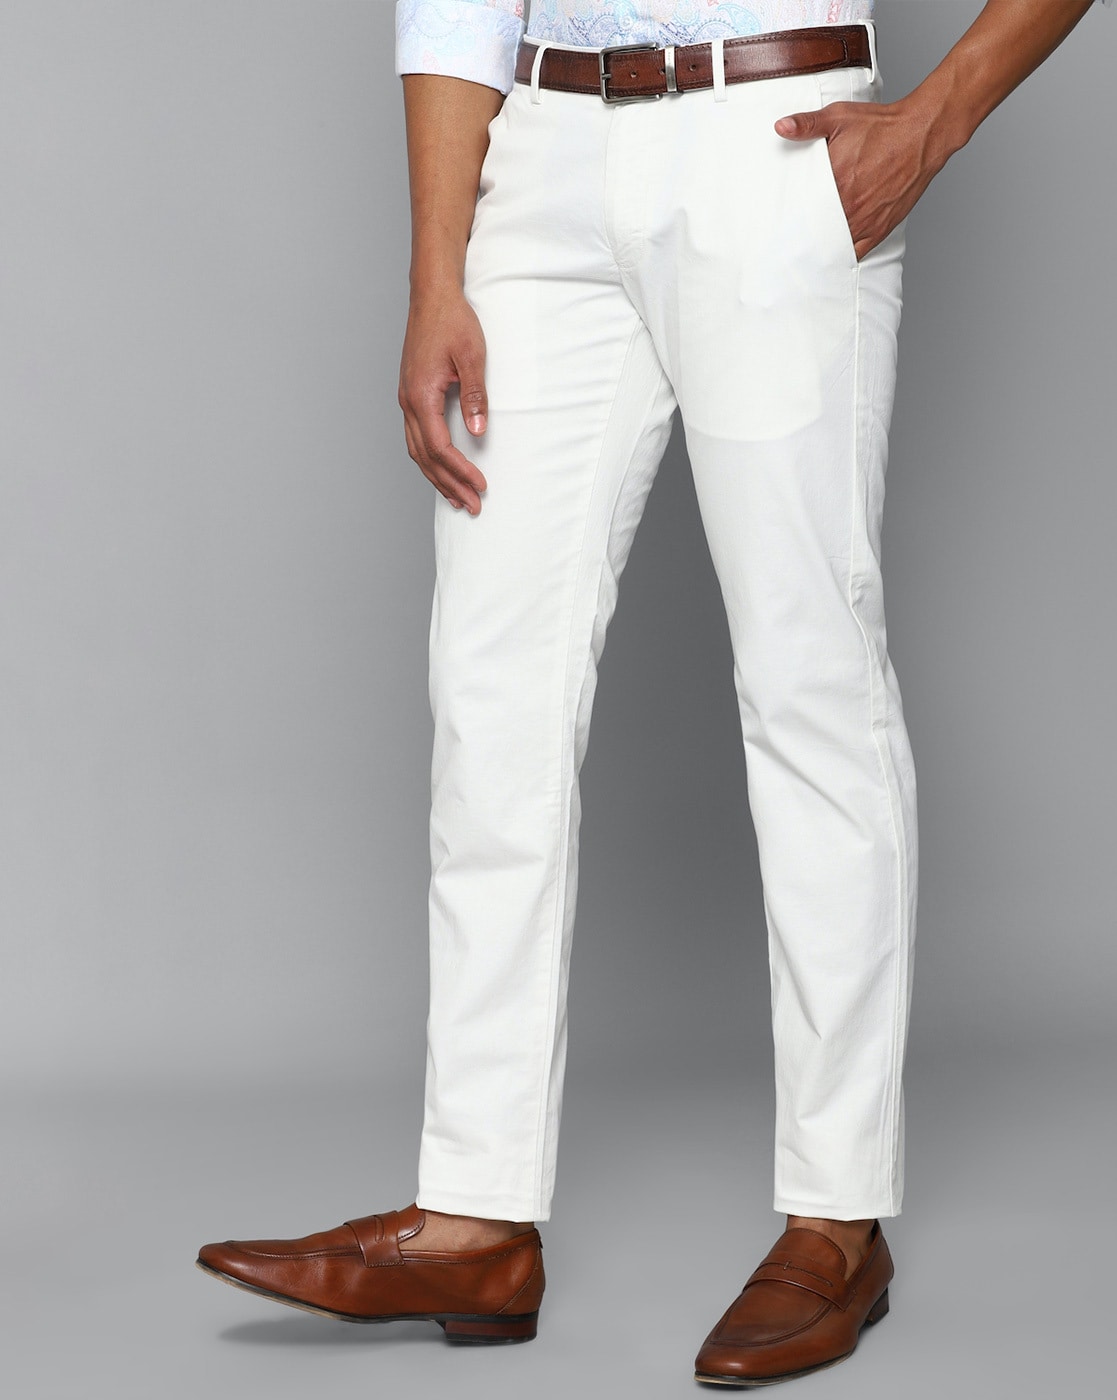 Buy OffWhite Trousers  Pants for Men by Cantabil Online  Ajiocom